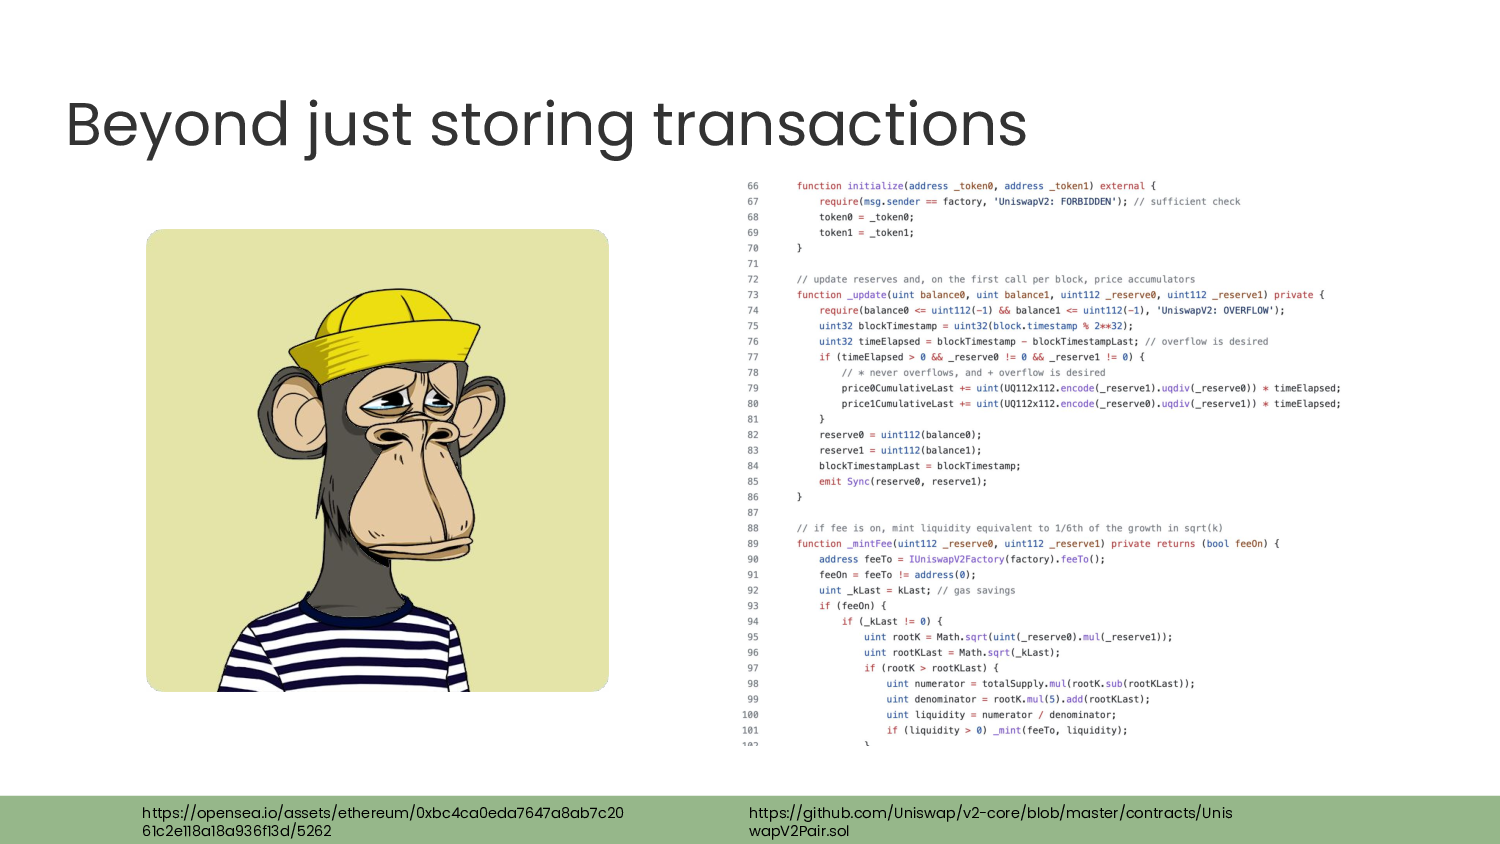 Title: Beyond just storing transactions. On the left is a Bored Ape NFT image. On the right is a screenshot of some smart contract code.